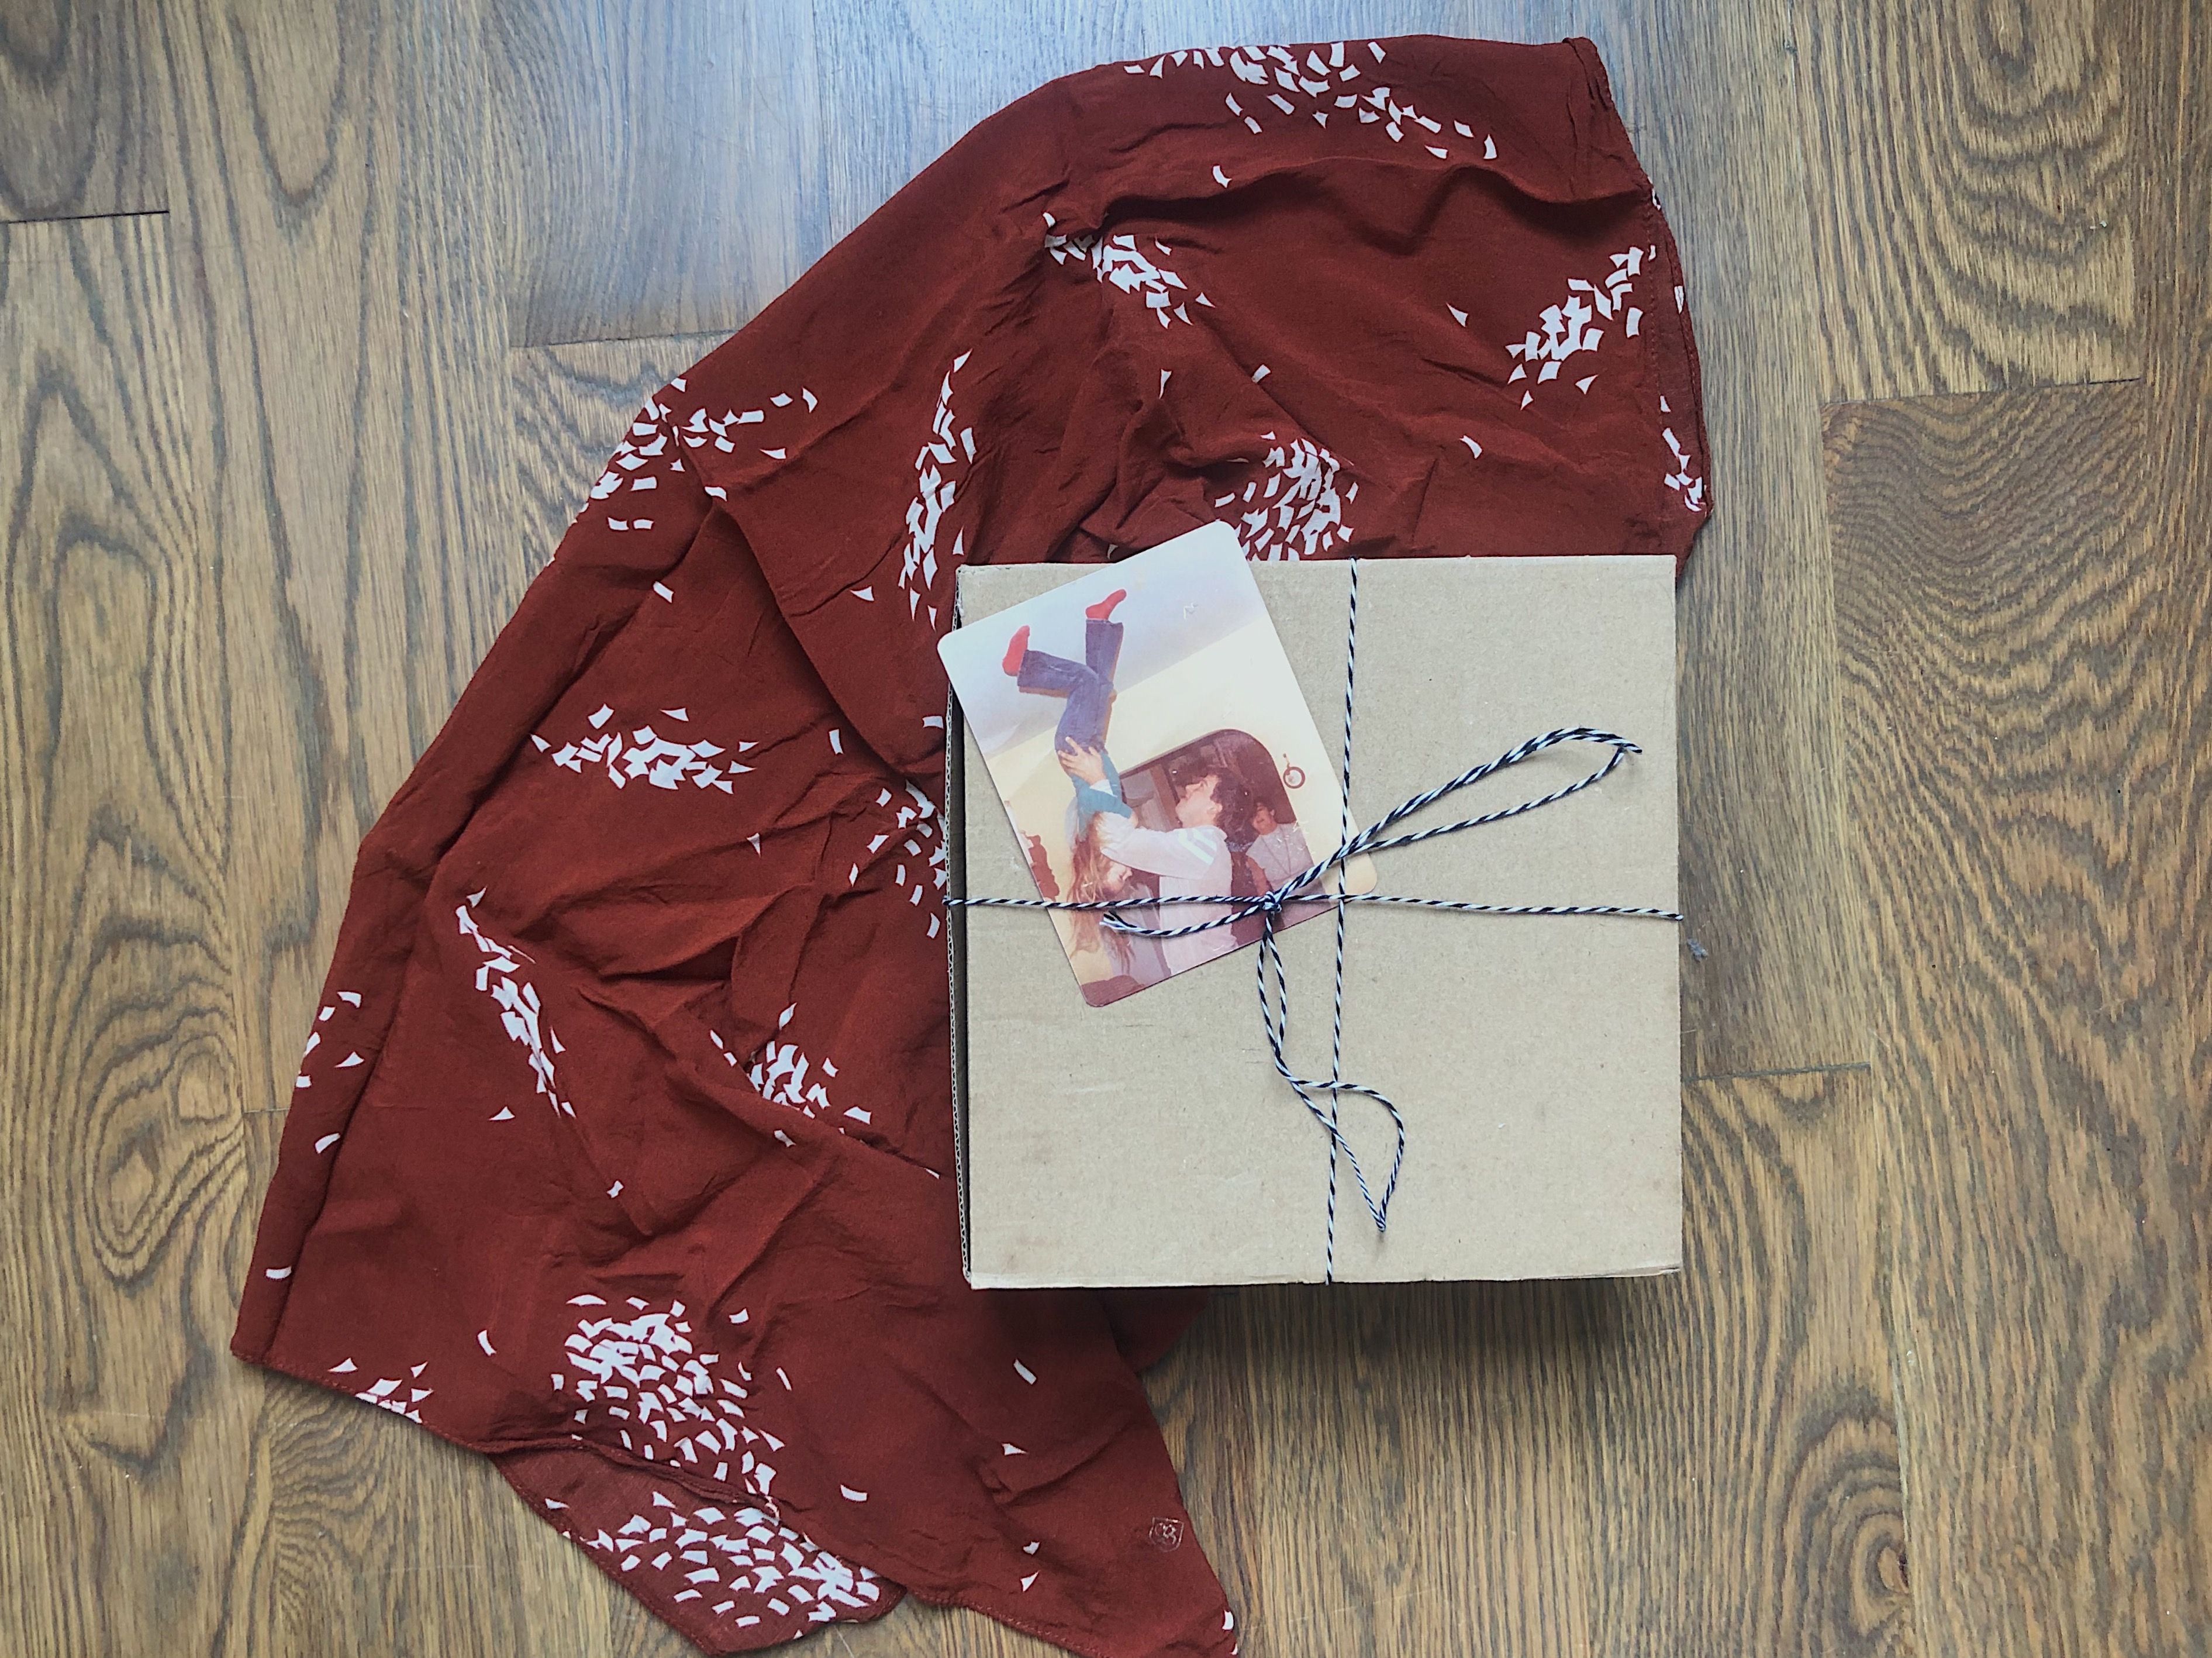 Make a lasting impression with this gift wrapping idea using photo prints